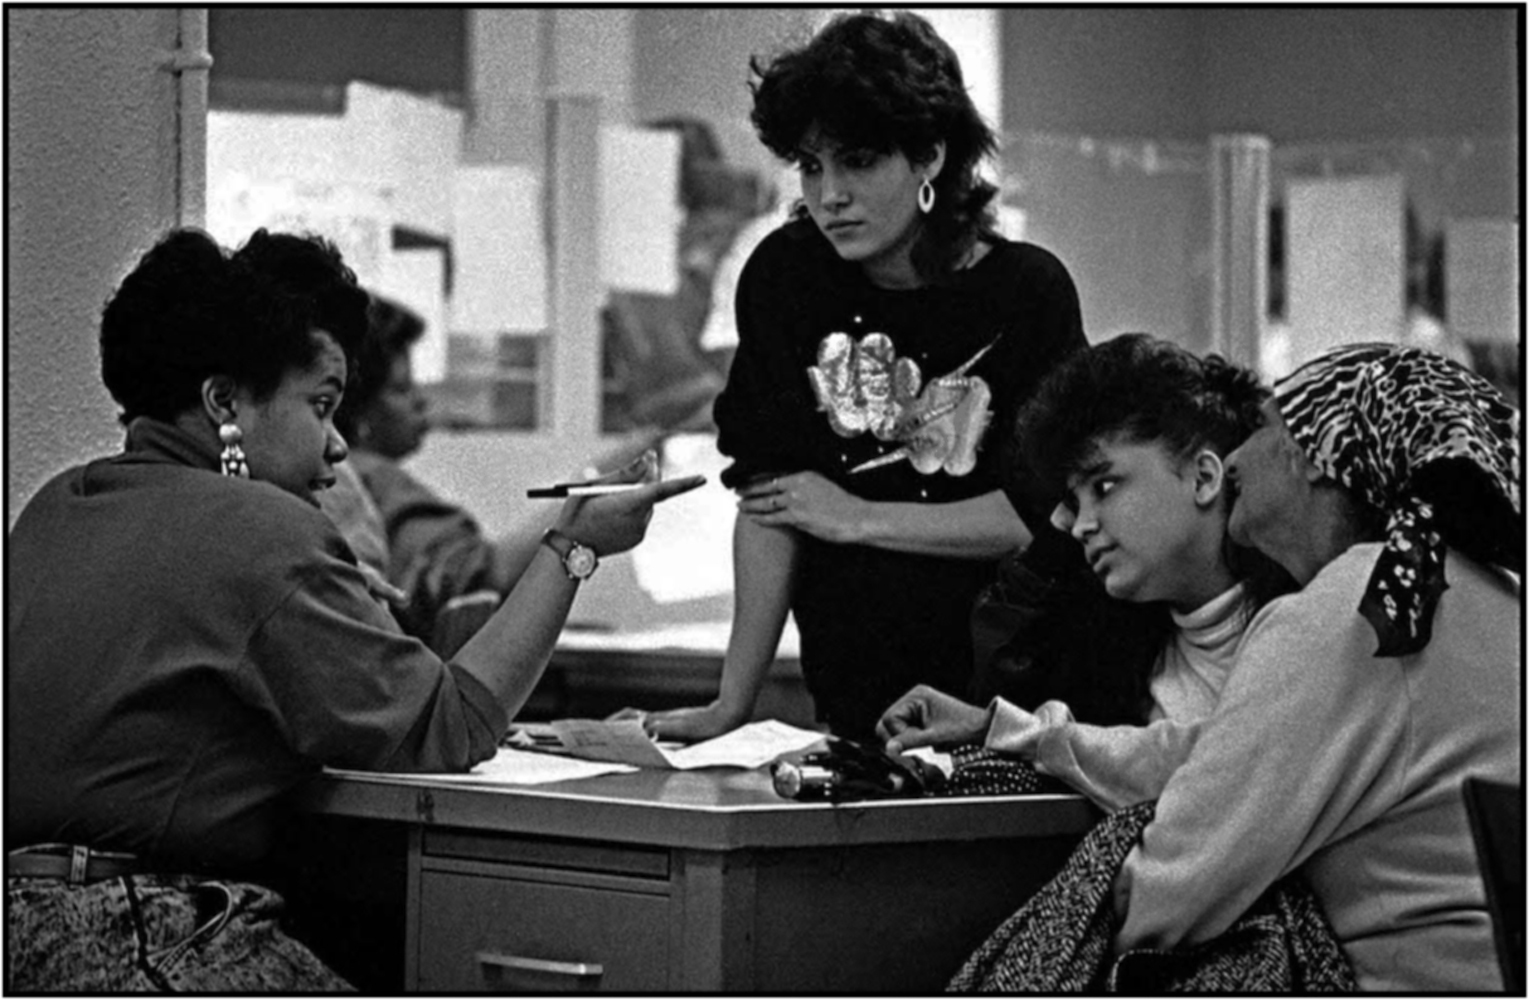   Eligibility specialist Kenyatta Jones (left) works with family at a Queens income maintenance center. 1988.  